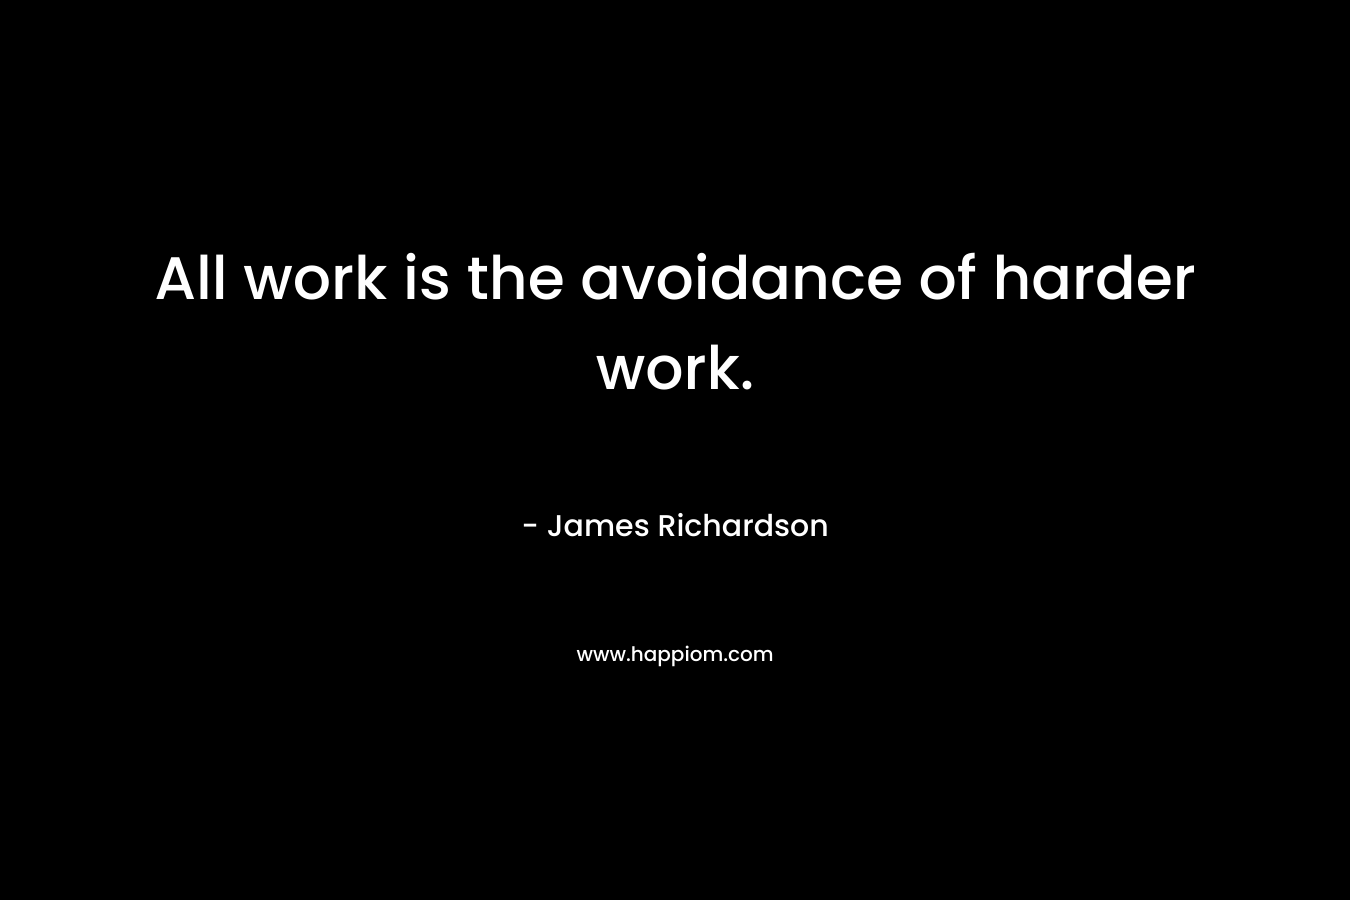 All work is the avoidance of harder work. – James Richardson